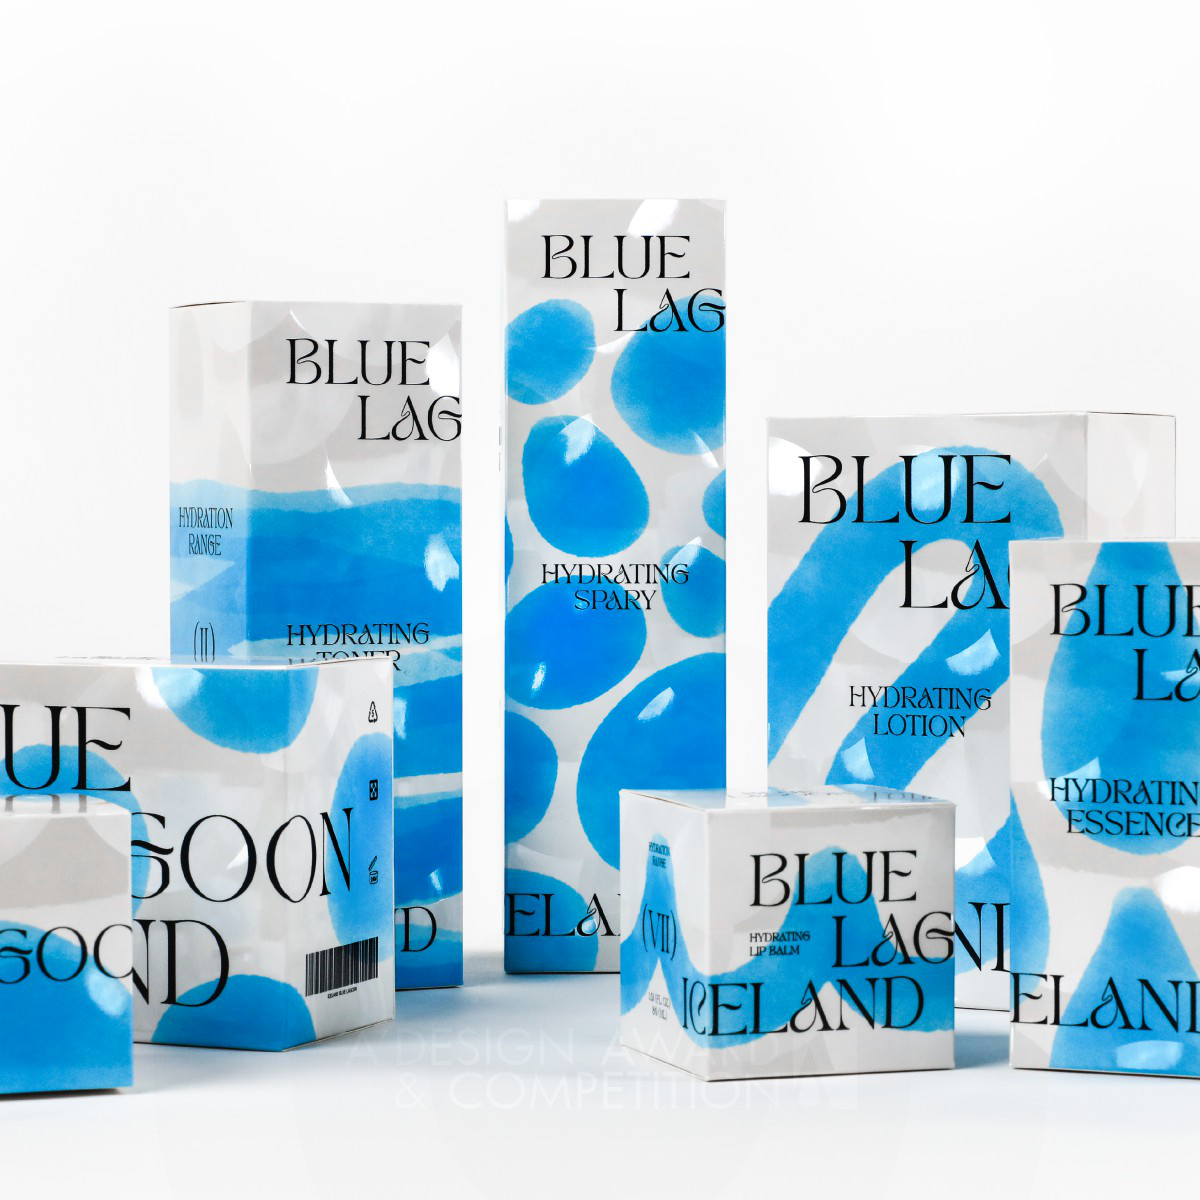 Curtis Ju wins Iron at the prestigious A' Packaging Design Award with Blue Lagoon Iceland Packaging.